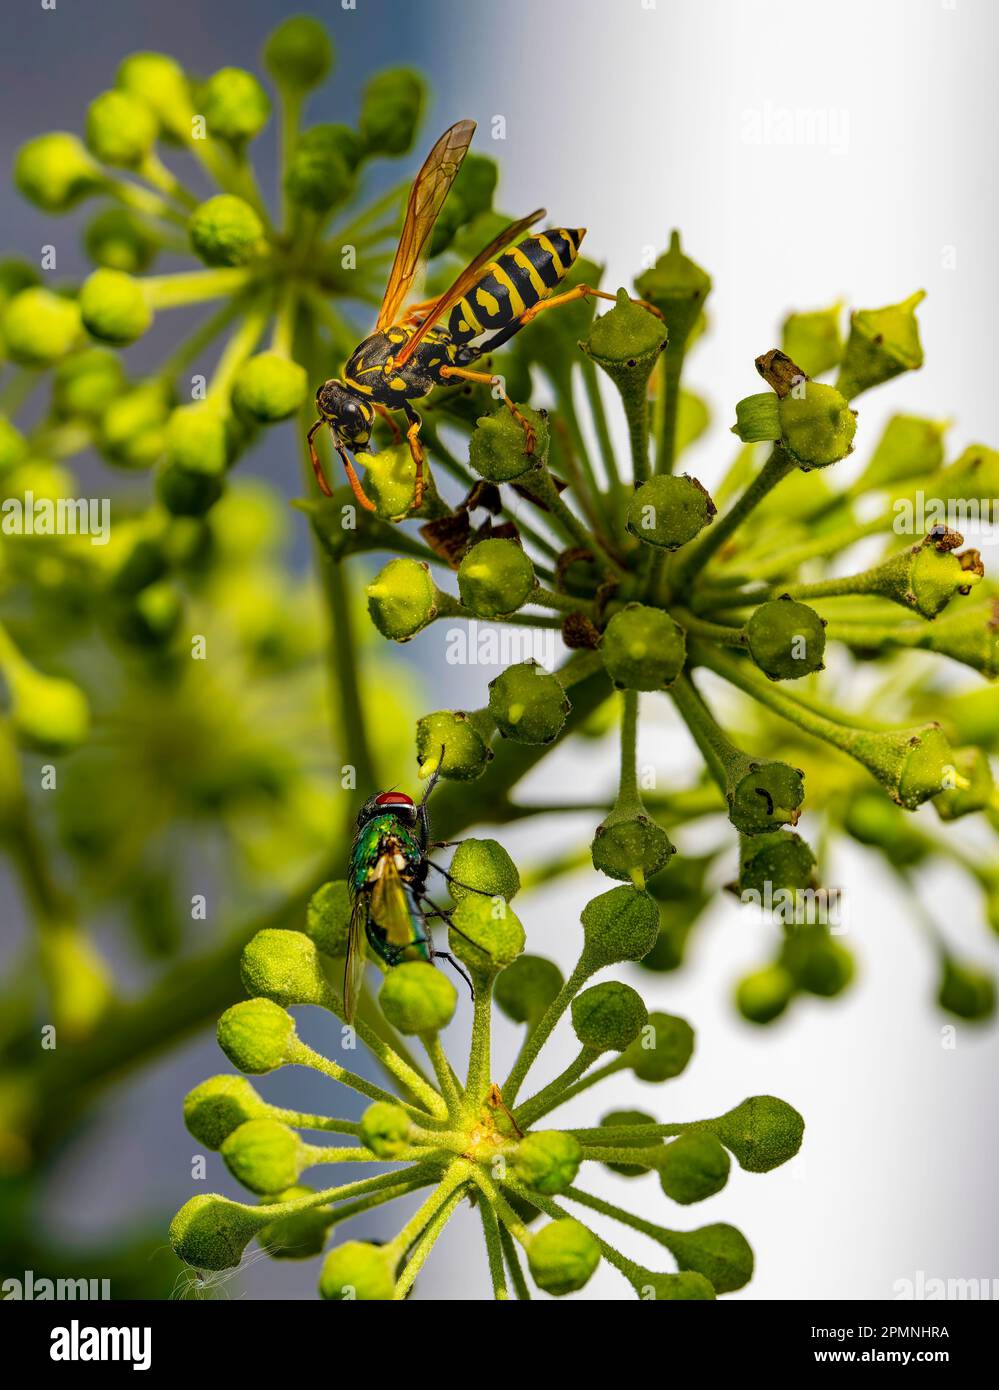 Stalking wasp sitting face to face with a fly on an ivy flower. Stock Photo